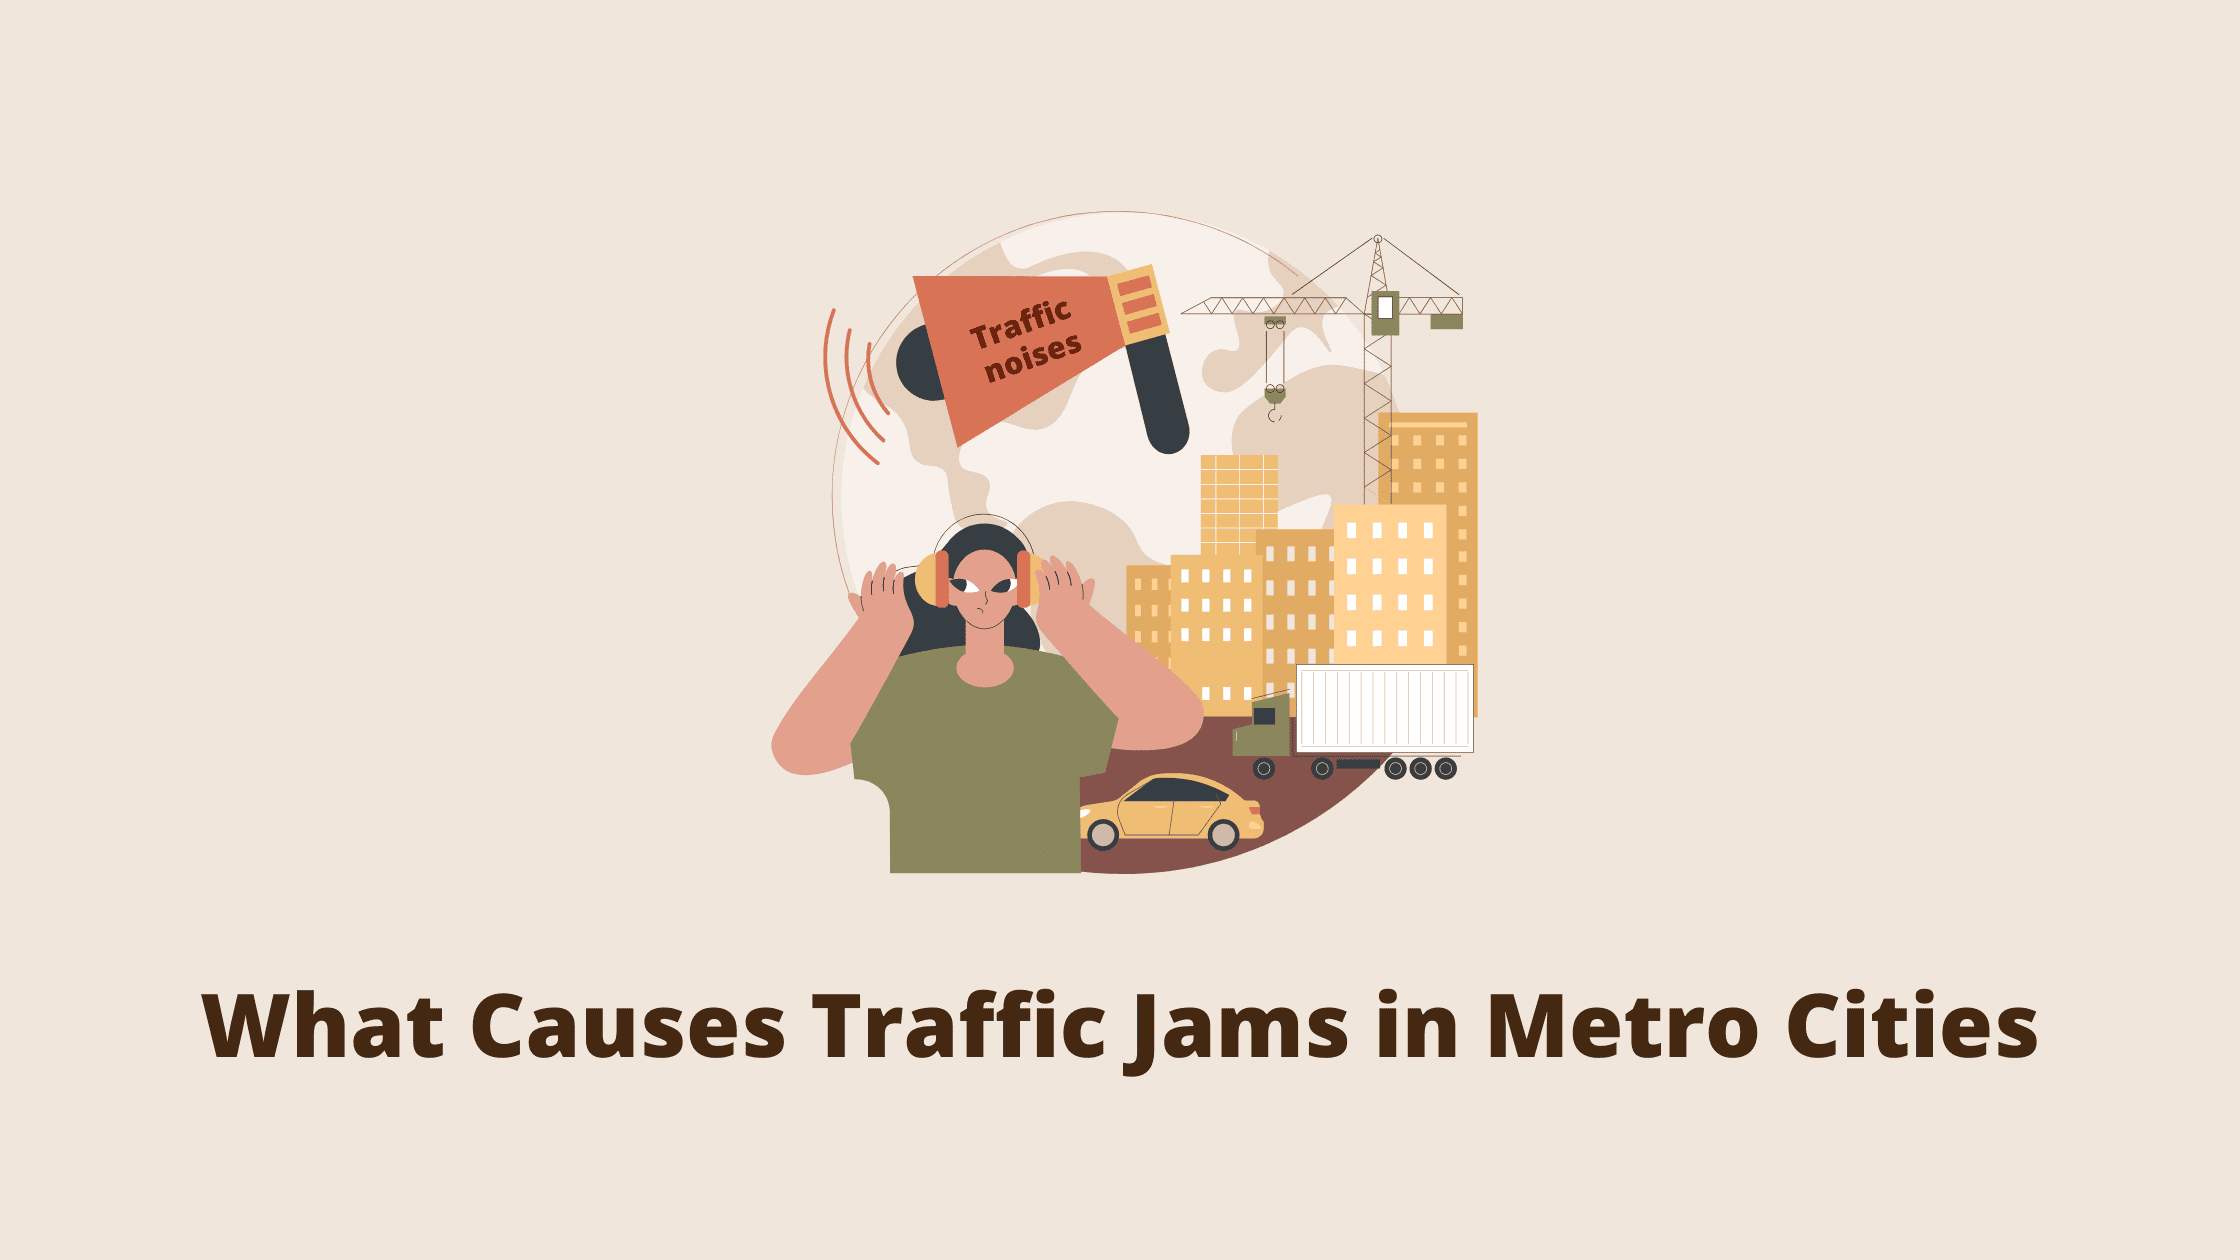 What Causes Traffic Jams in Metro Cities?